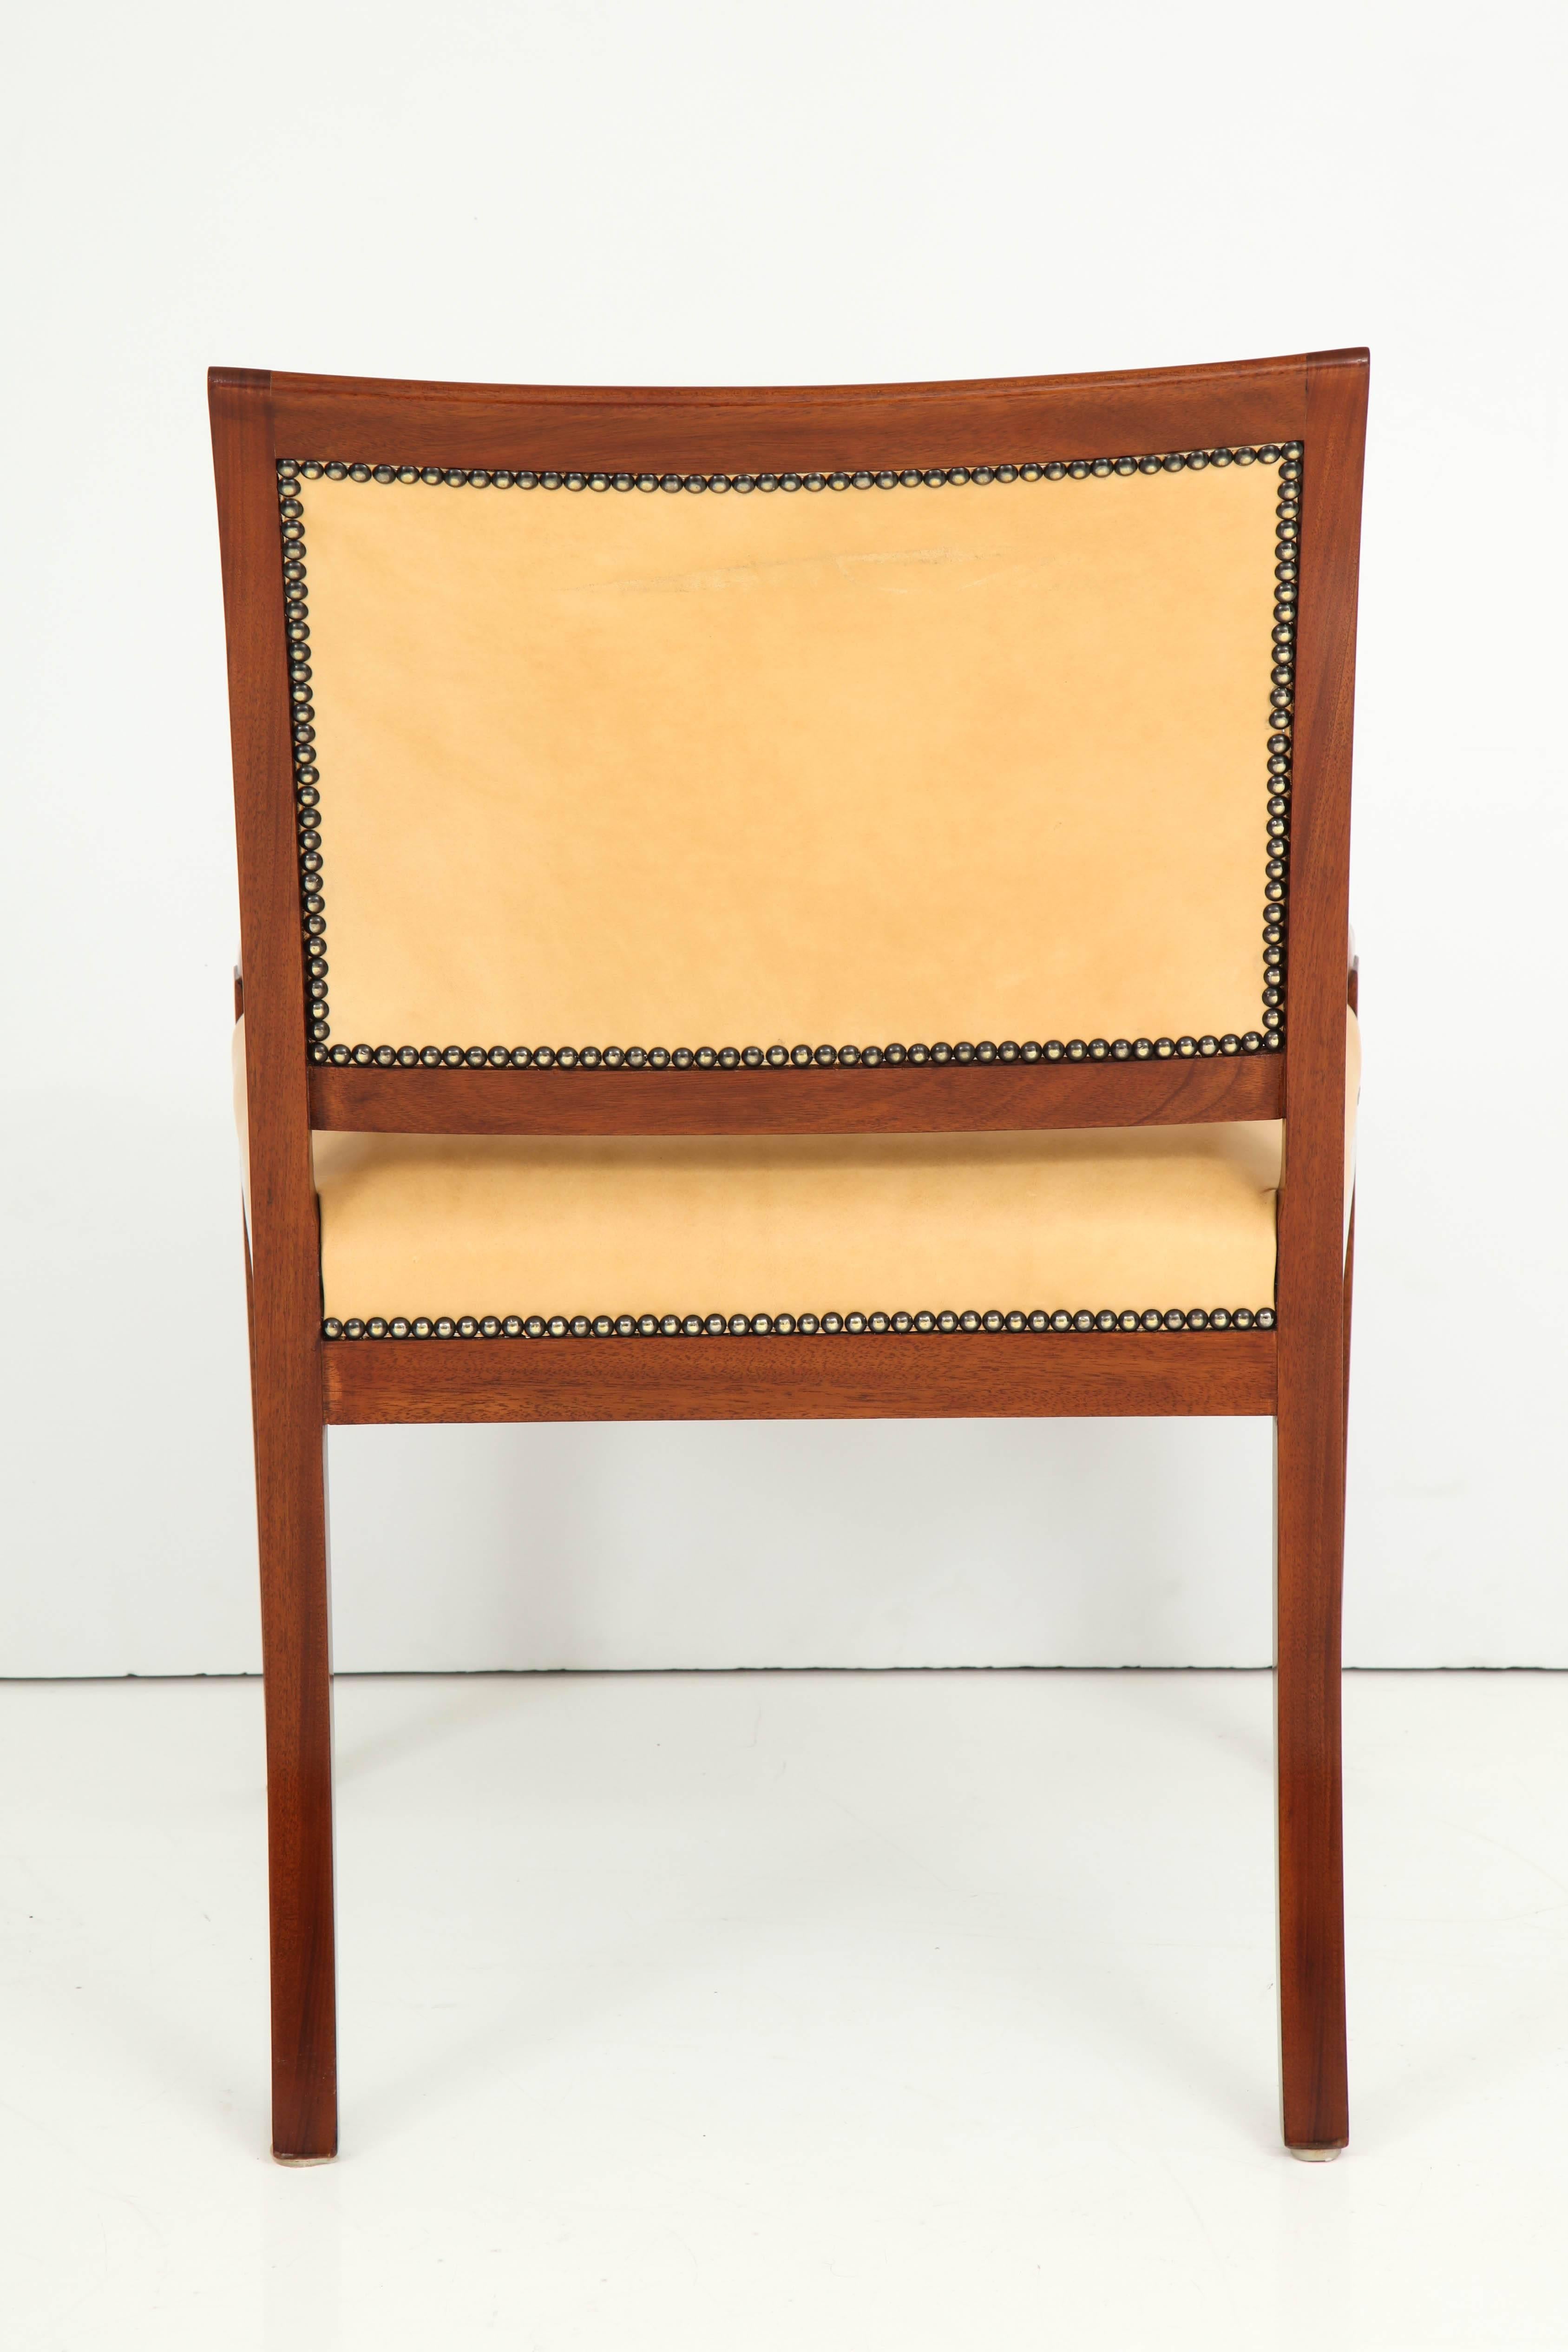 Danish Pair of Frits Henningsen Mahogany and Leather Open Armchair, circa 1940s